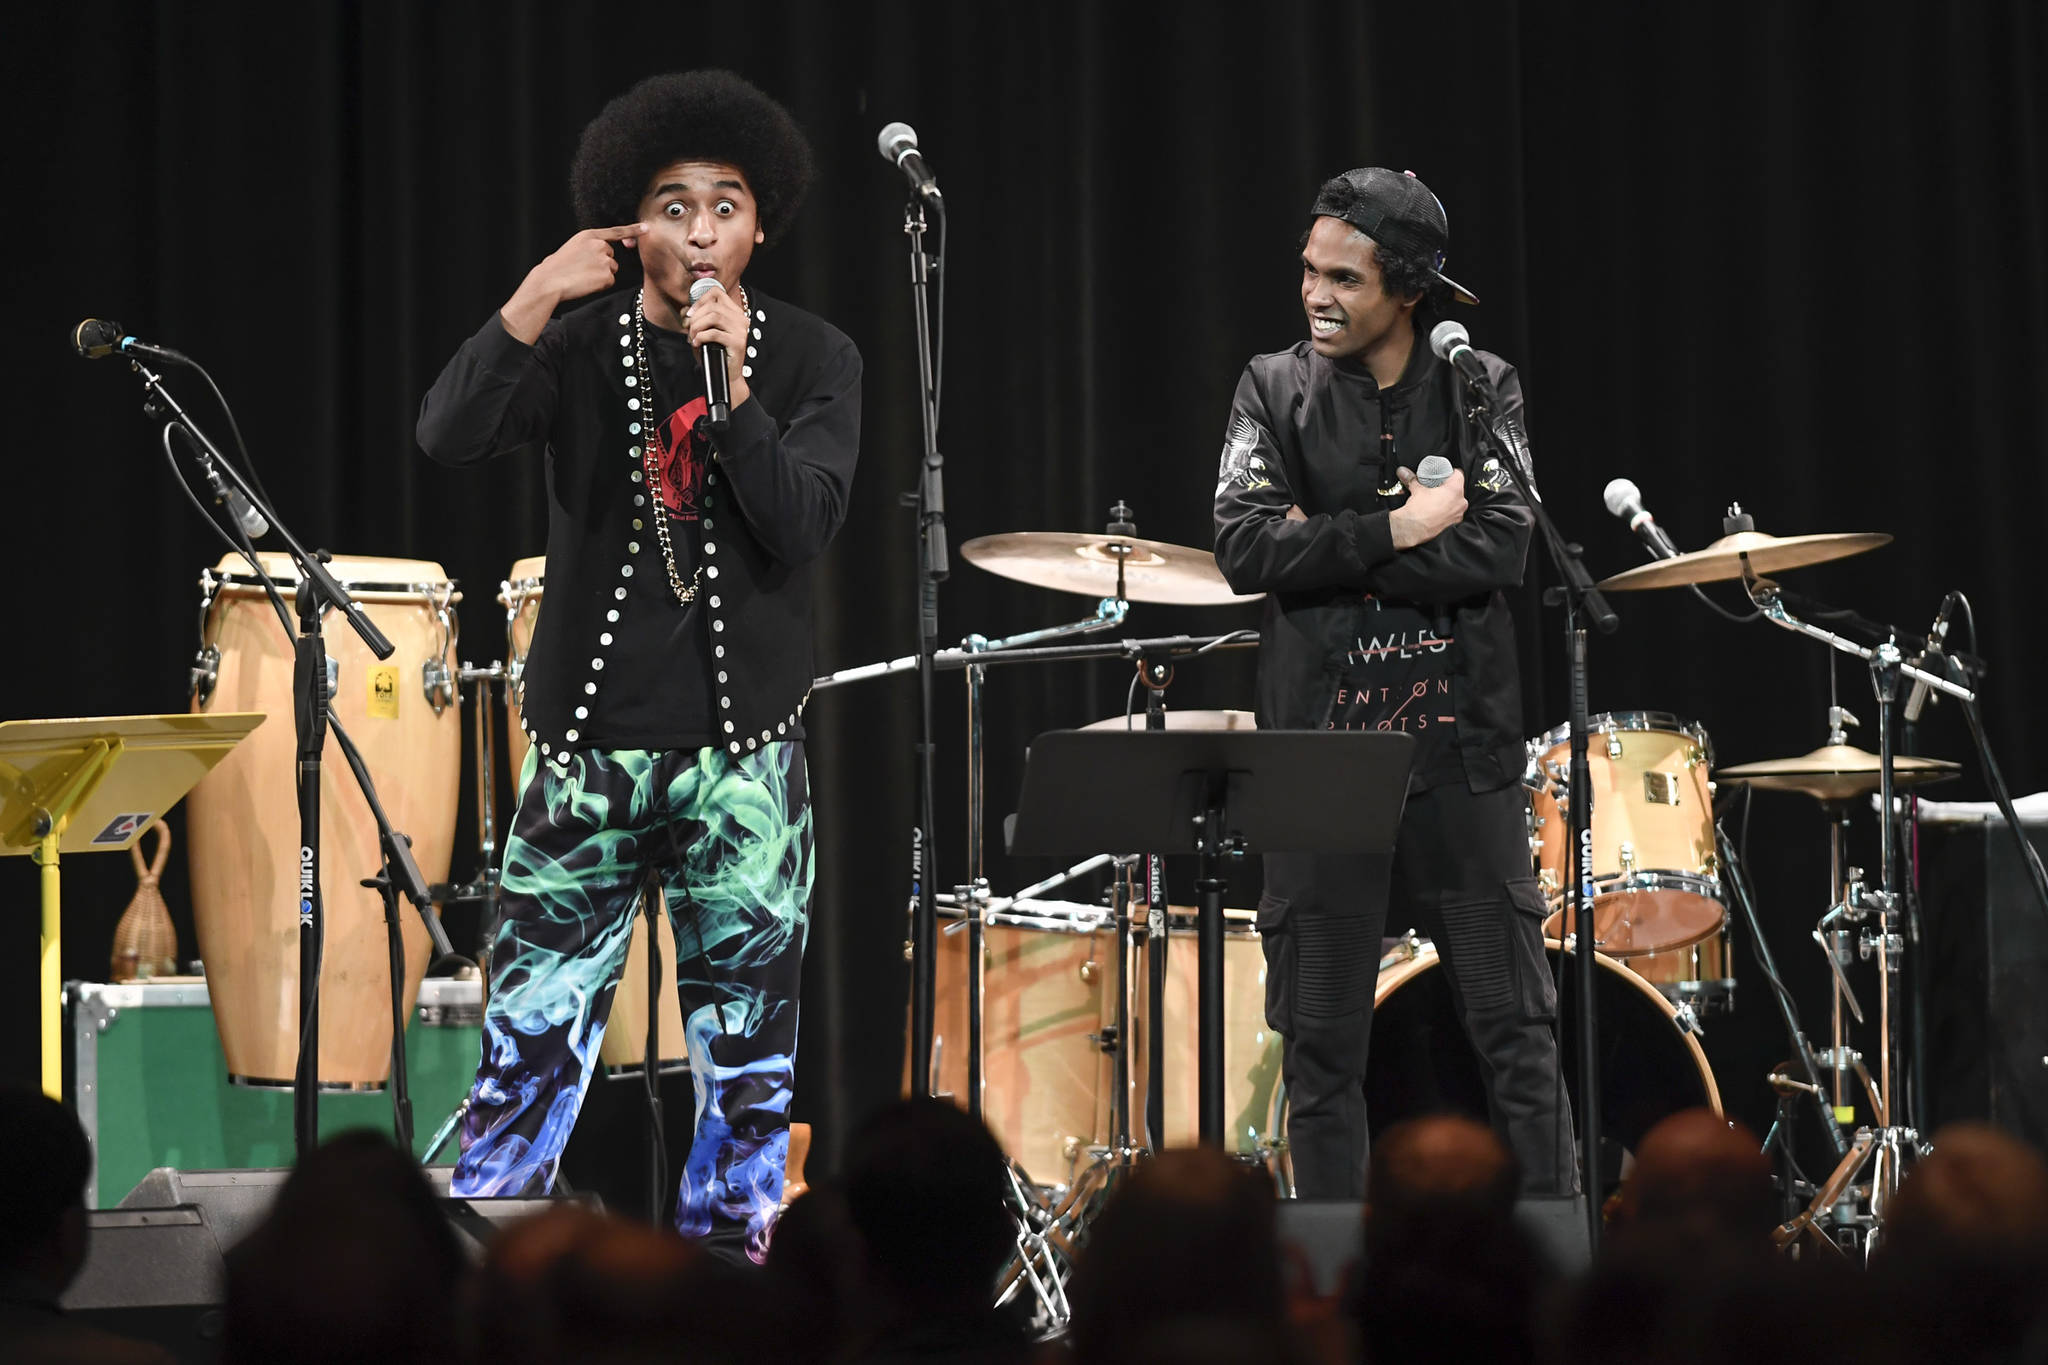 Hip Hop duo of Arias “A.J.” Hoyle and Chris Talley perform an opening act before Khu.eex’ performance at Centennial Hall on Monday, Jan. 28, 2019. (Michael Penn | Juneau Empire)